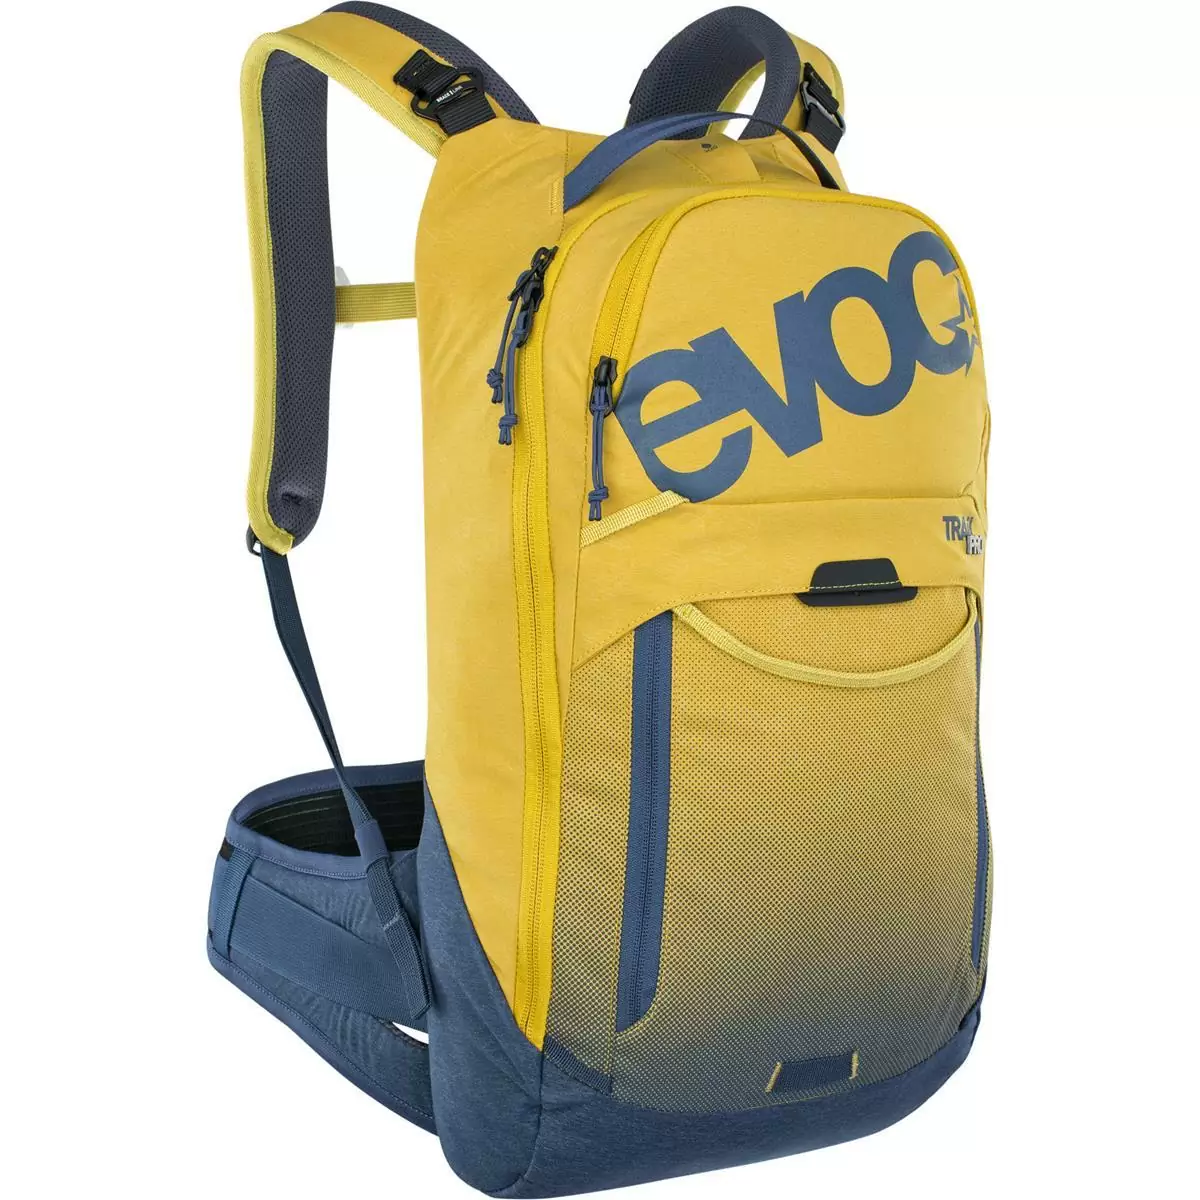 Backpack Trail Pro 10 litri Curry - Denim size S/M - image